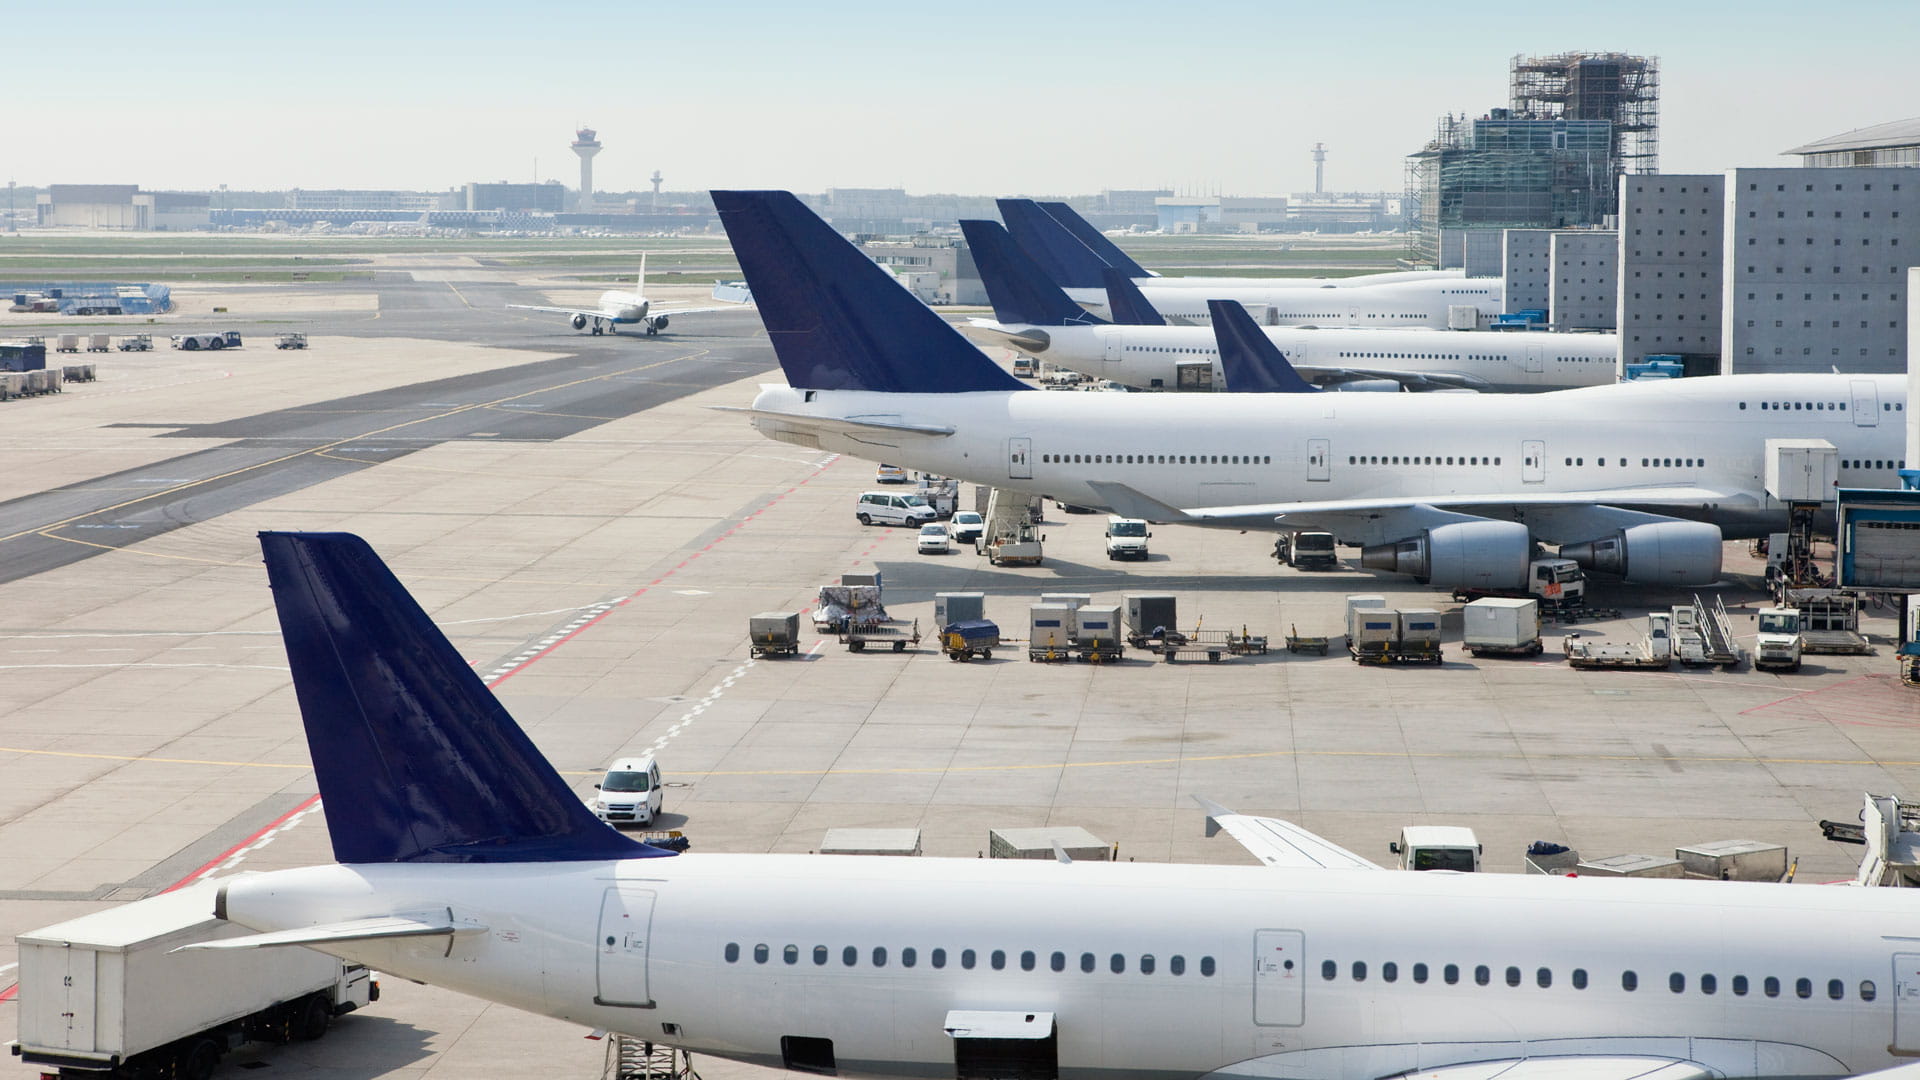 Planes parked in airport terminal